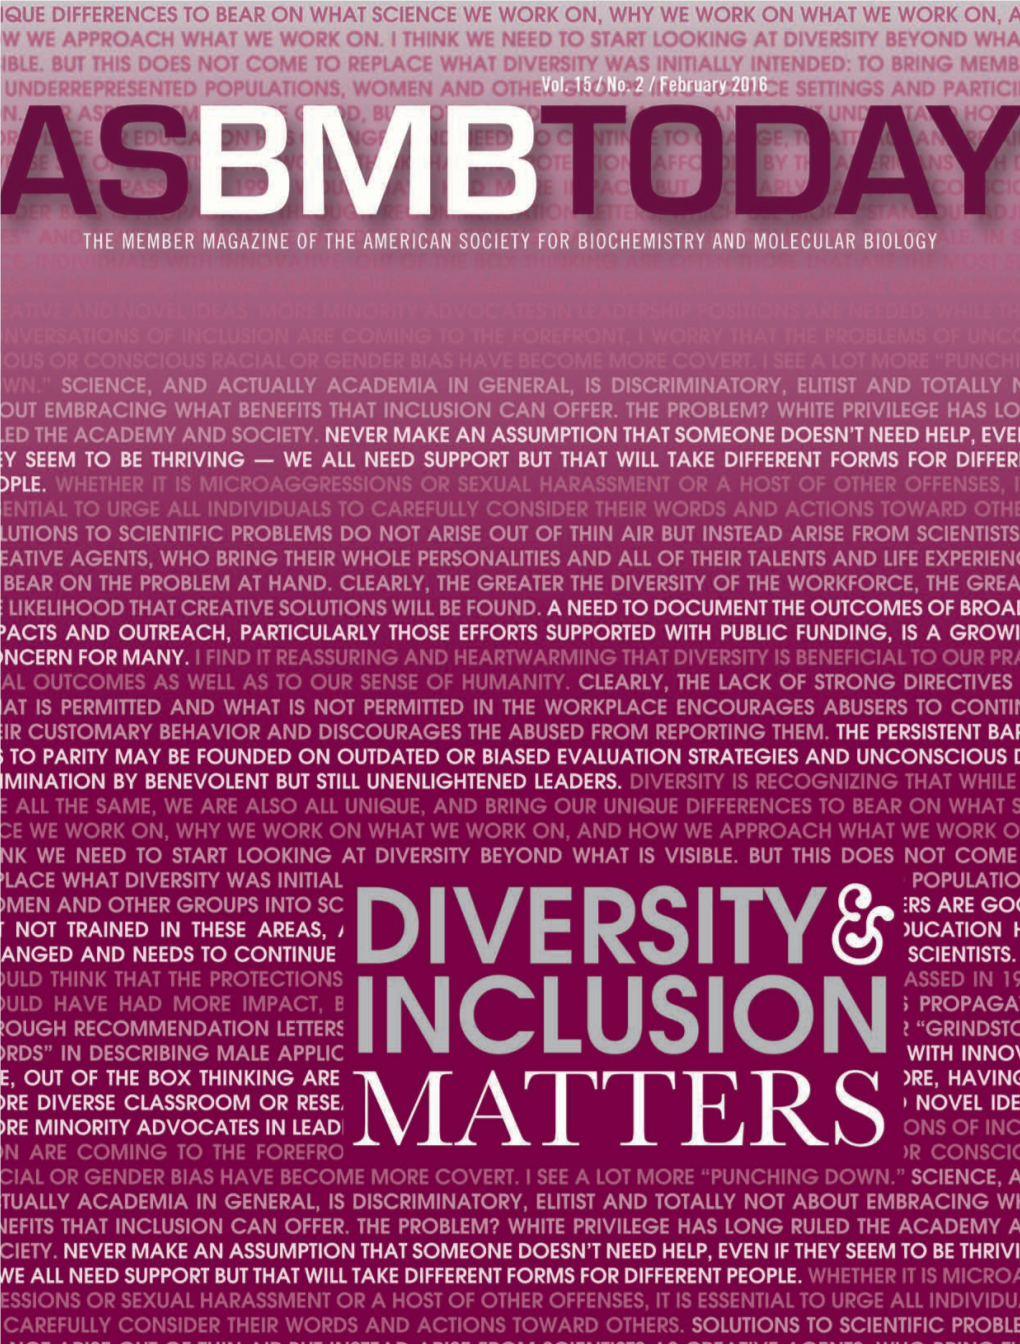 February 2016 Asbmb Today 1 Editor’S Note